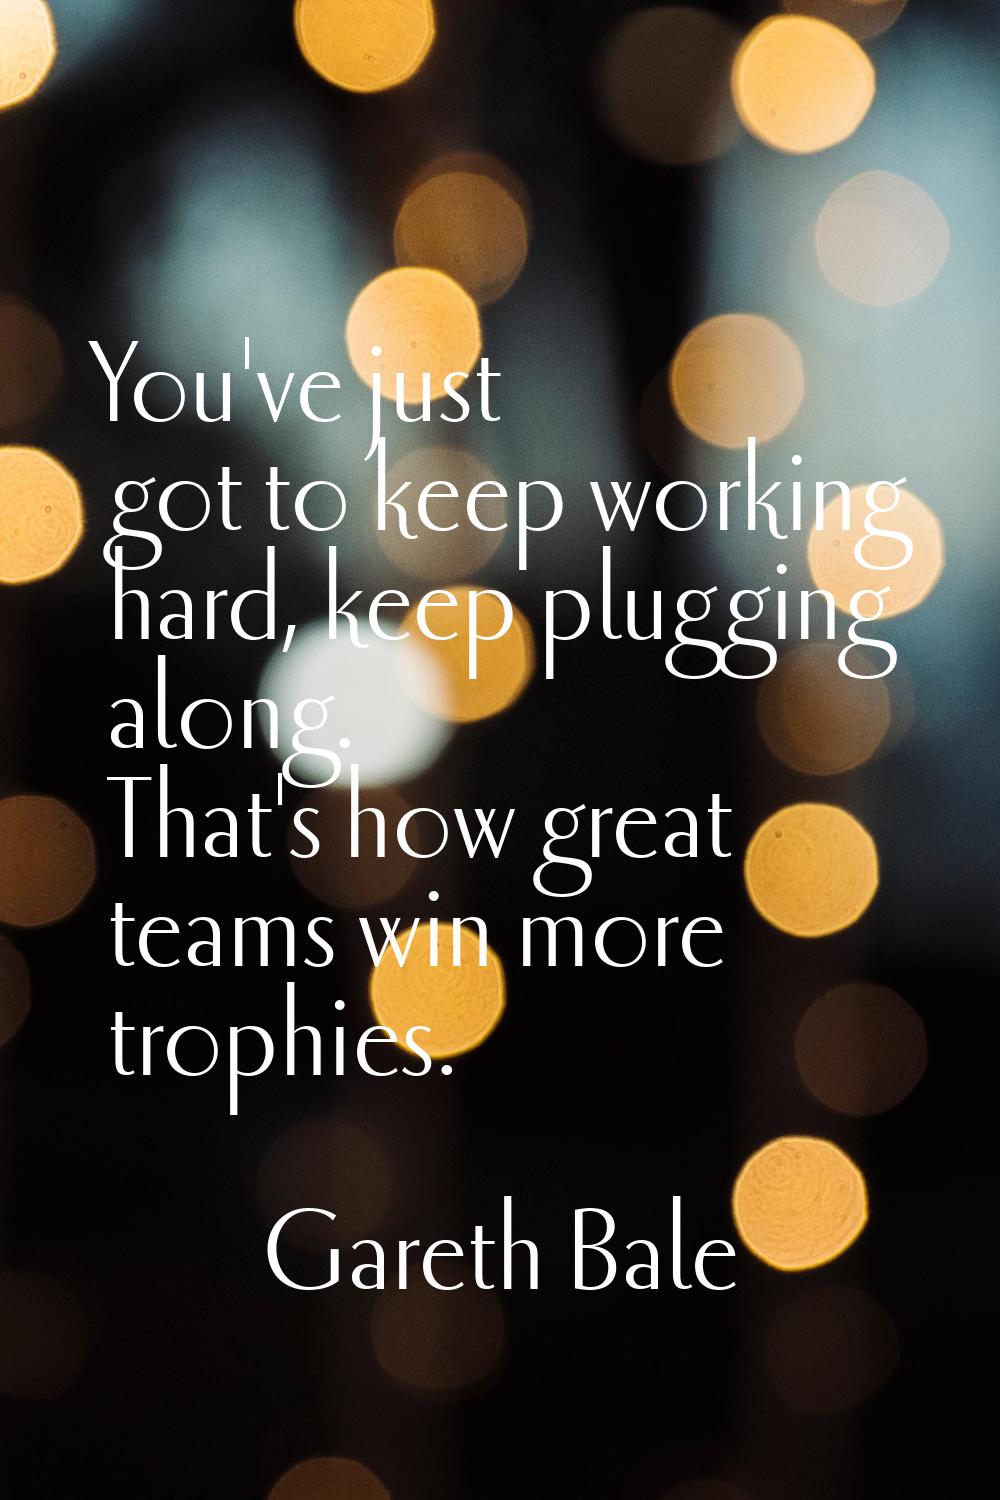 You've just got to keep working hard, keep plugging along. That's how great teams win more trophies